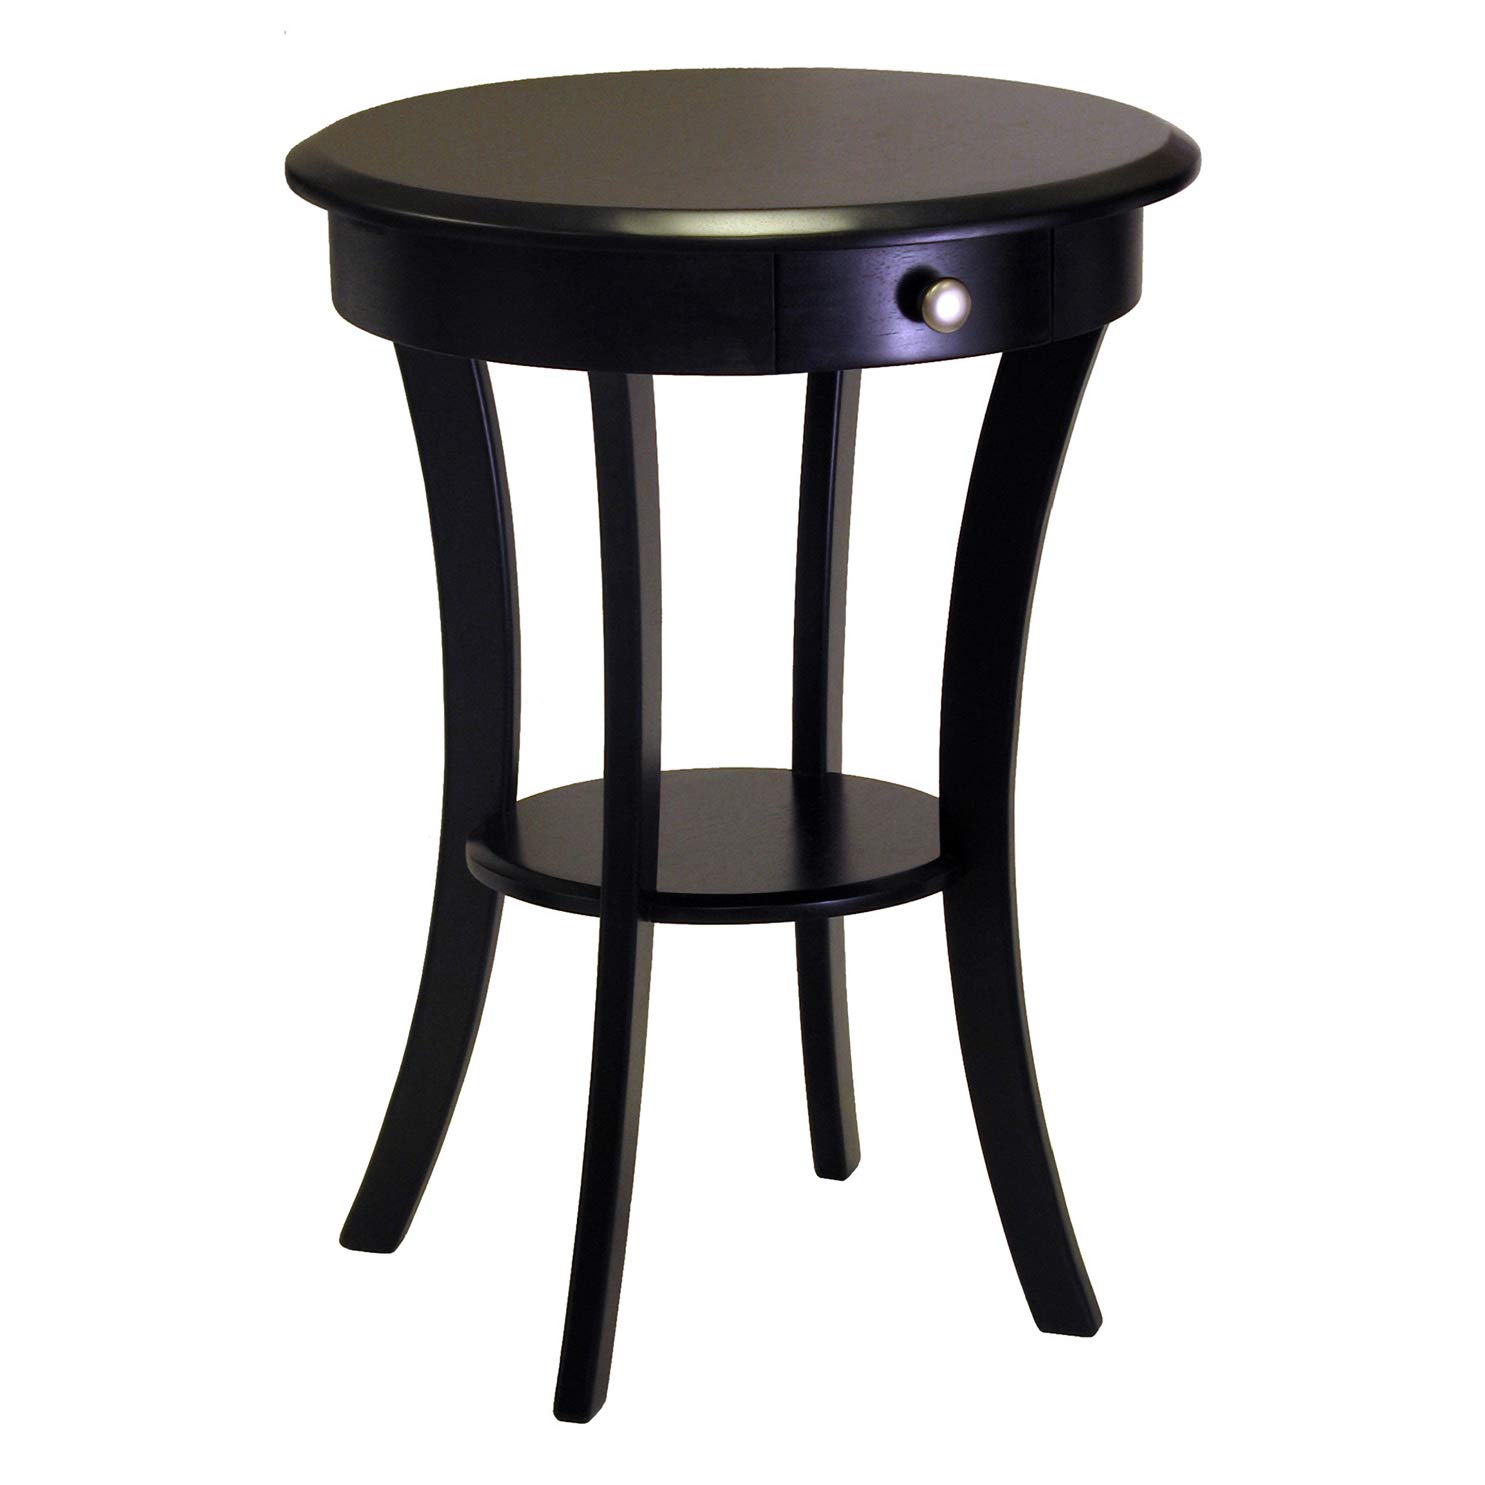 winsome wood sasha accent table black kitchen beechwood end espresso dining small glass cocktail ikea shelves vintage bedroom furniture bunnings cushions farm with bench and